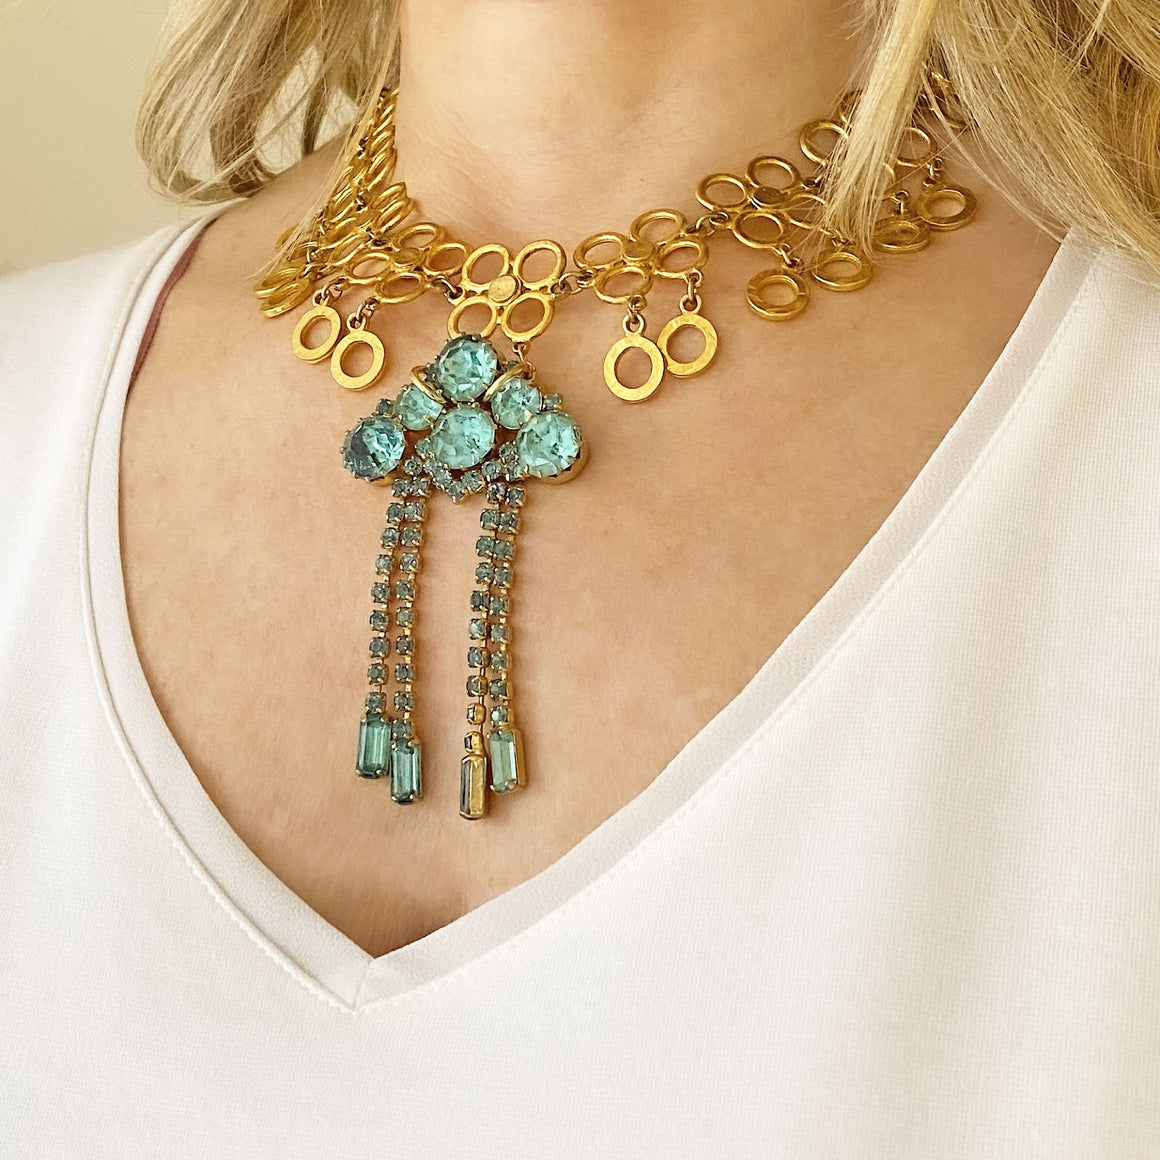 JANEY teal and gold choker necklace-GREEN BIJOU